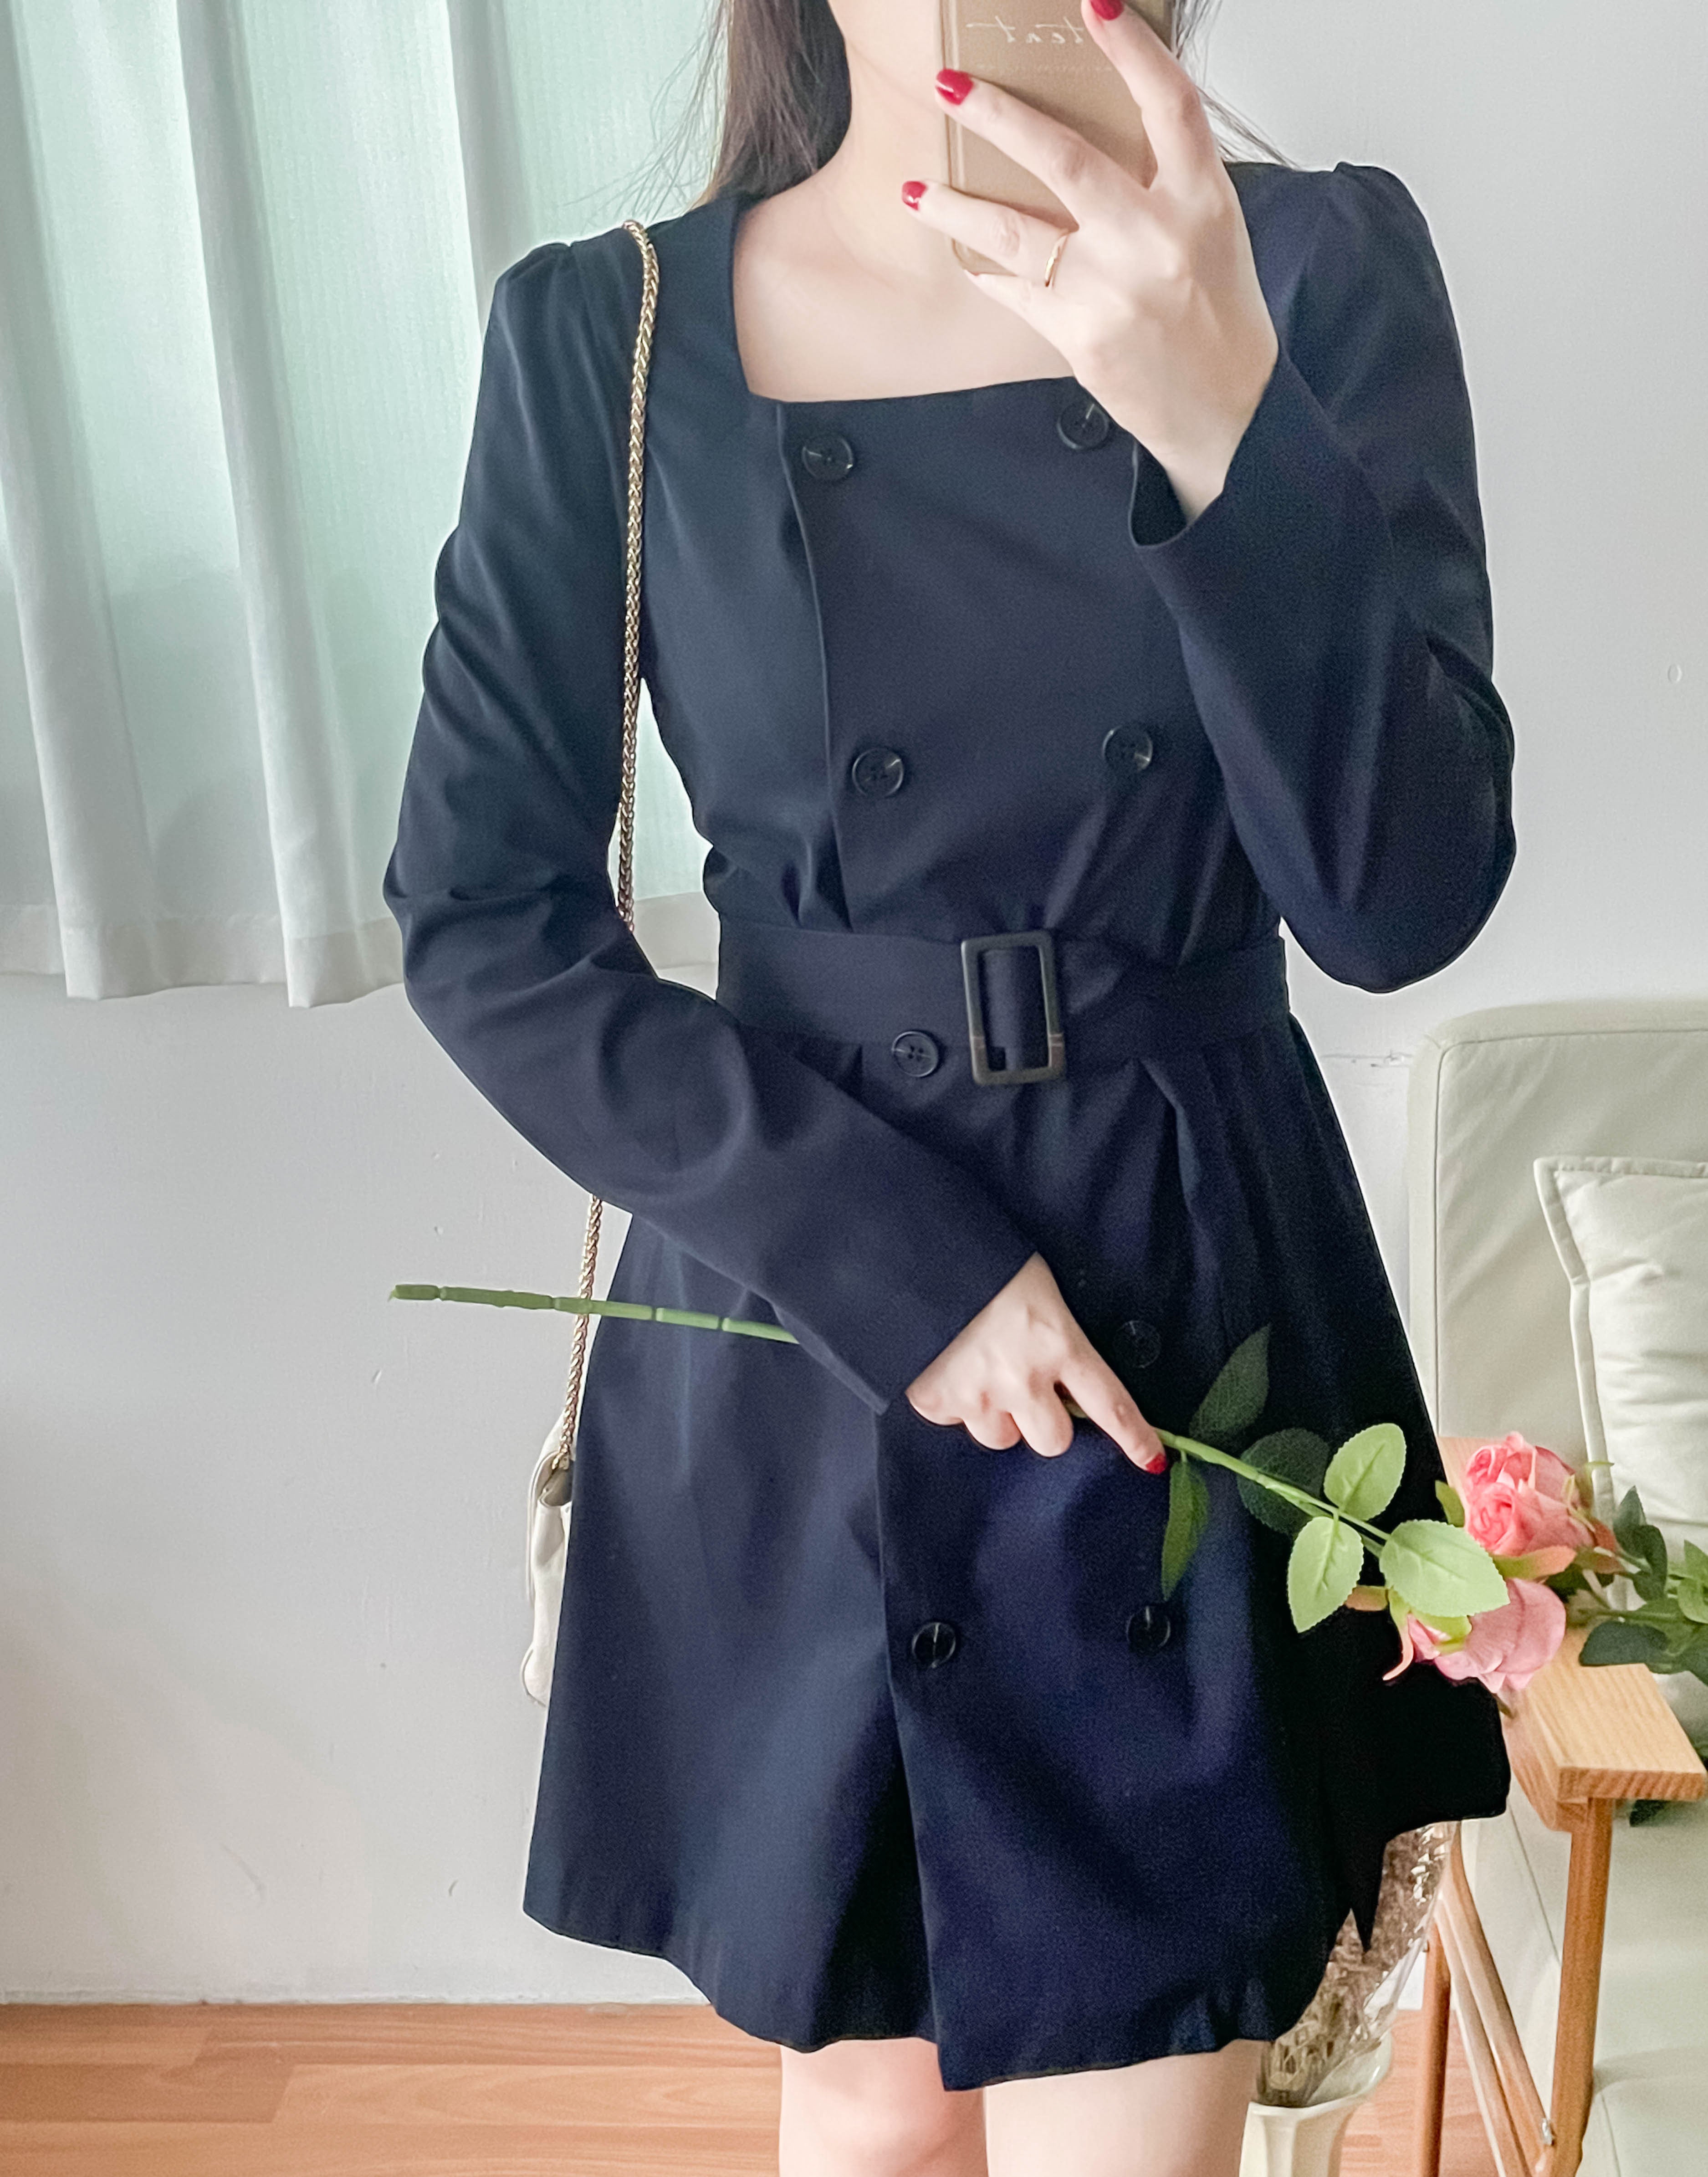 Trench 方領風衣雙排鈕雲石腰帶連身裙, Dress/ DS9333 （navy sold out)